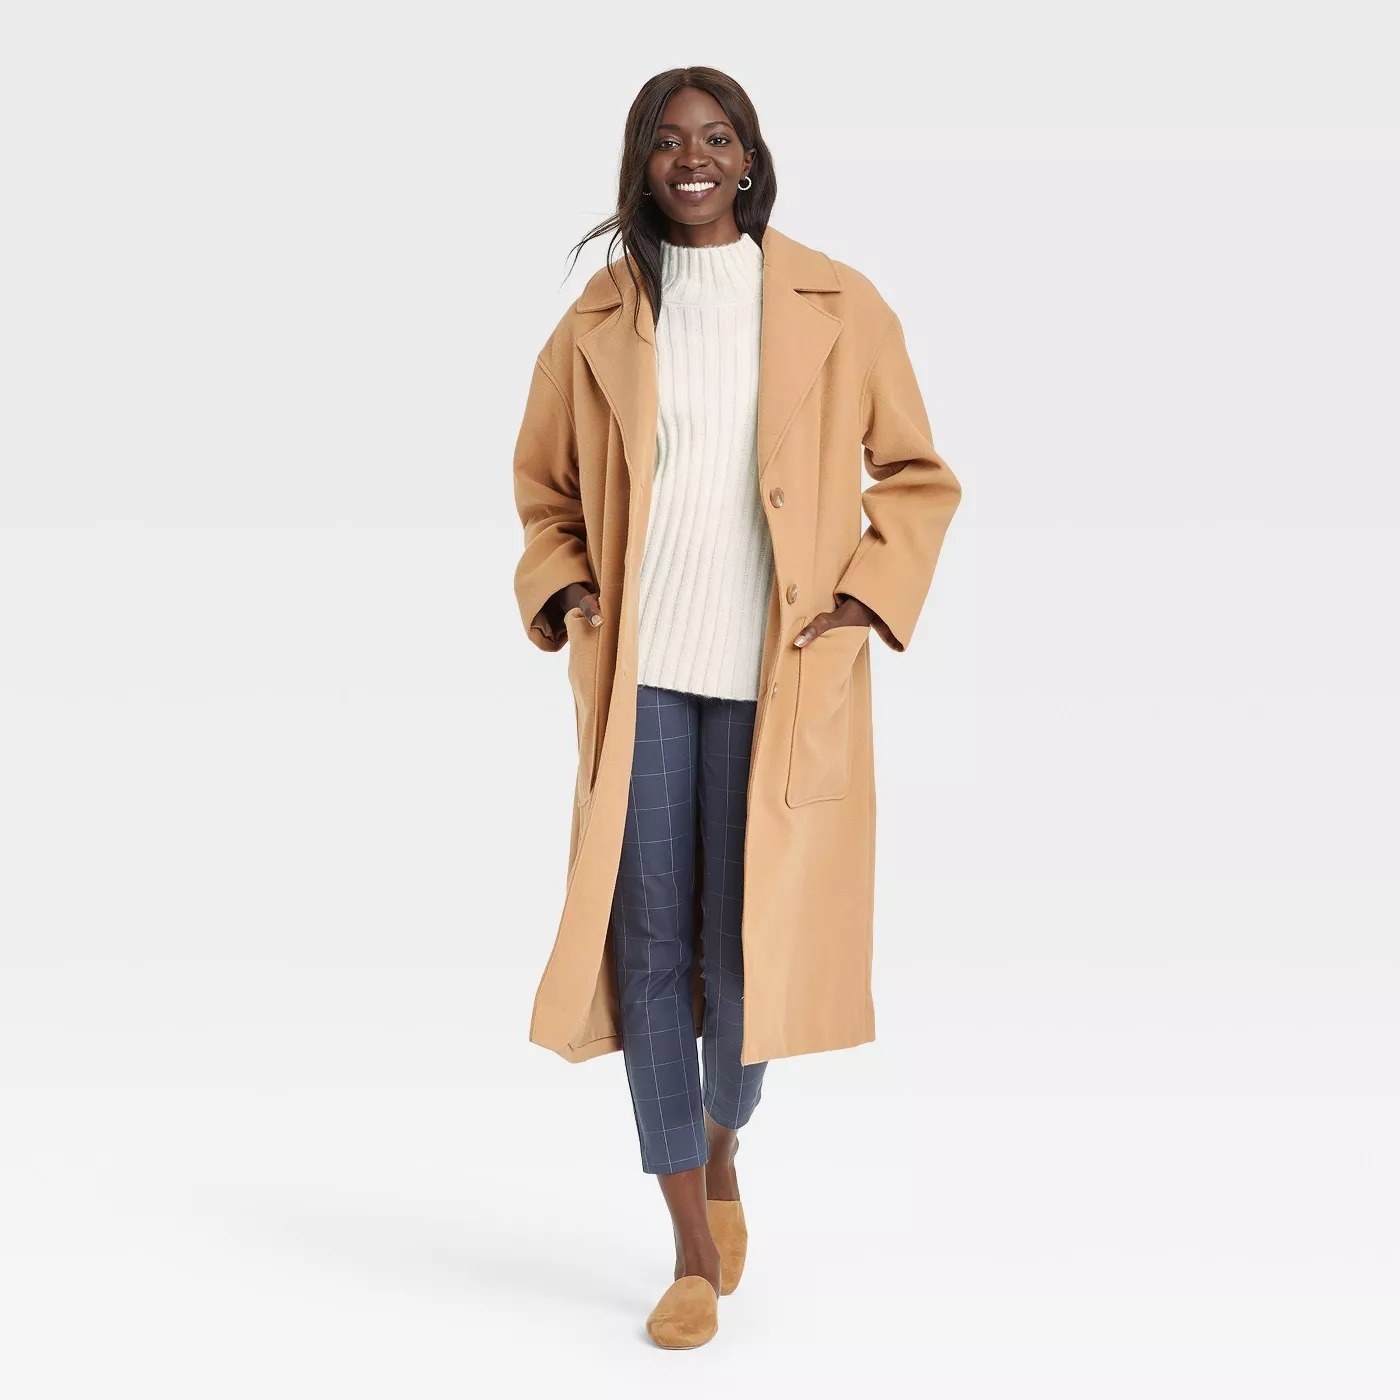 Model wearing camel colored coat with pockets